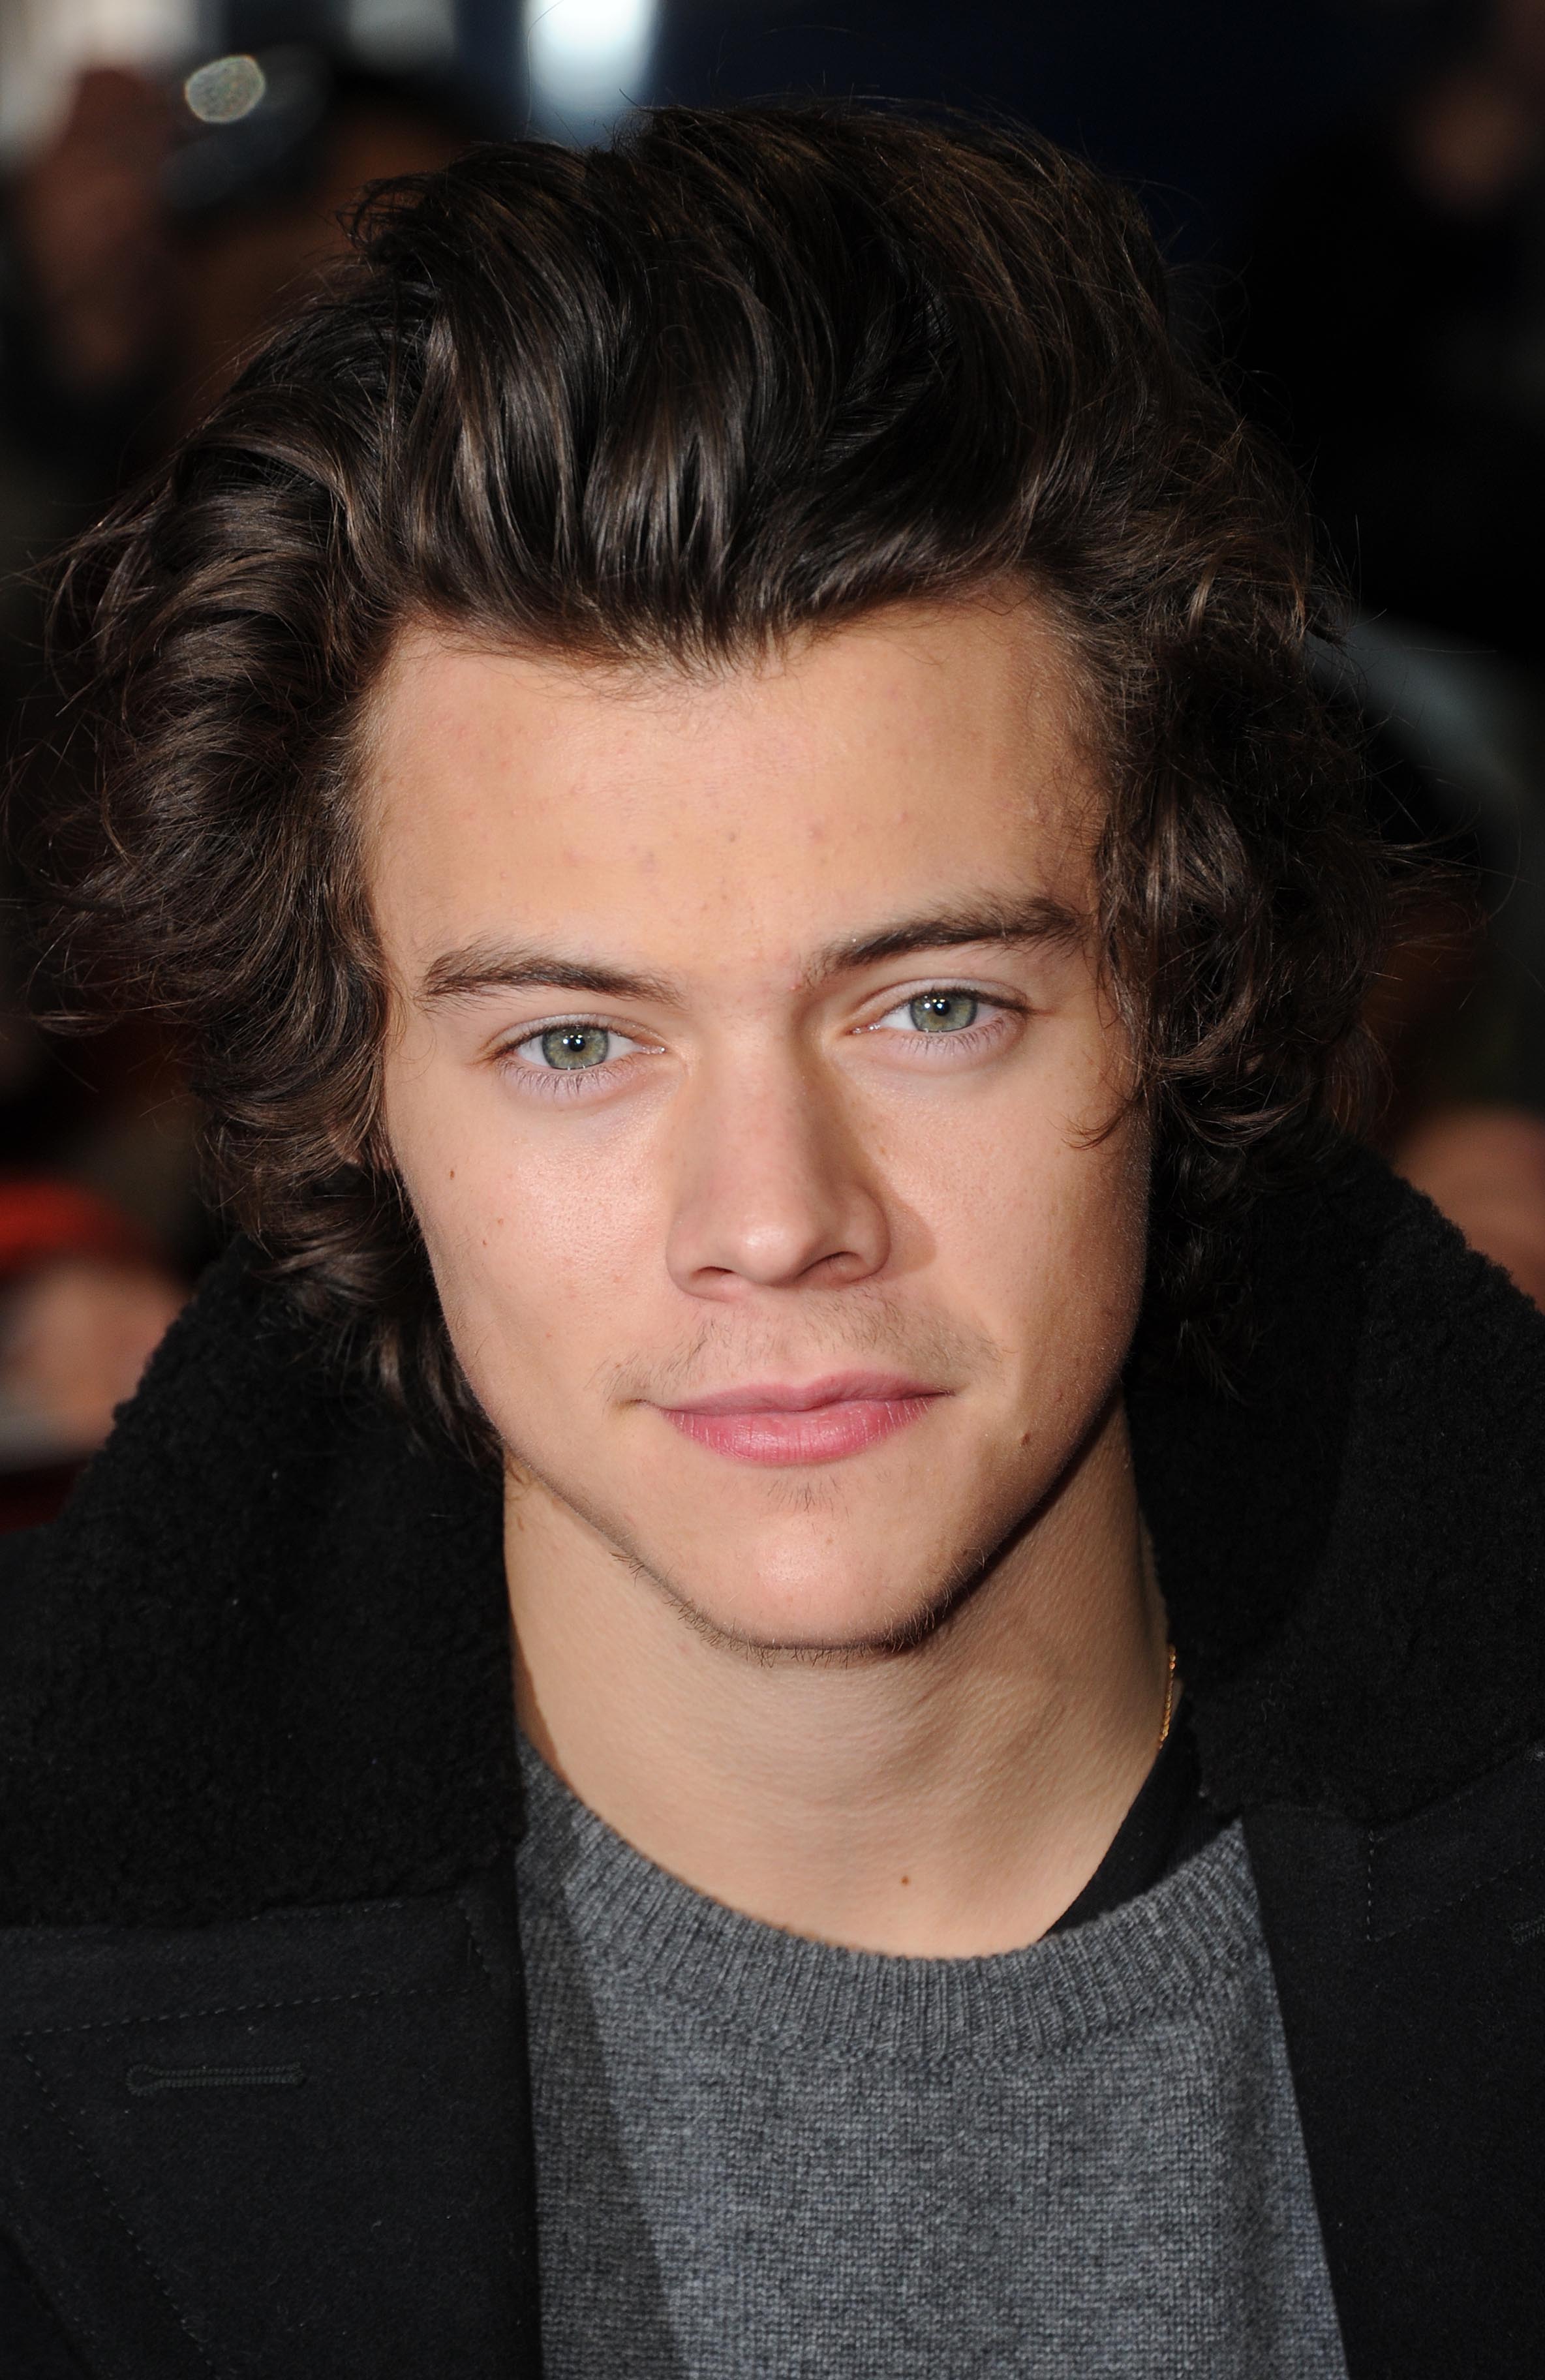 What Color Are Harry Styles Eyes The Answer Is More Complicated